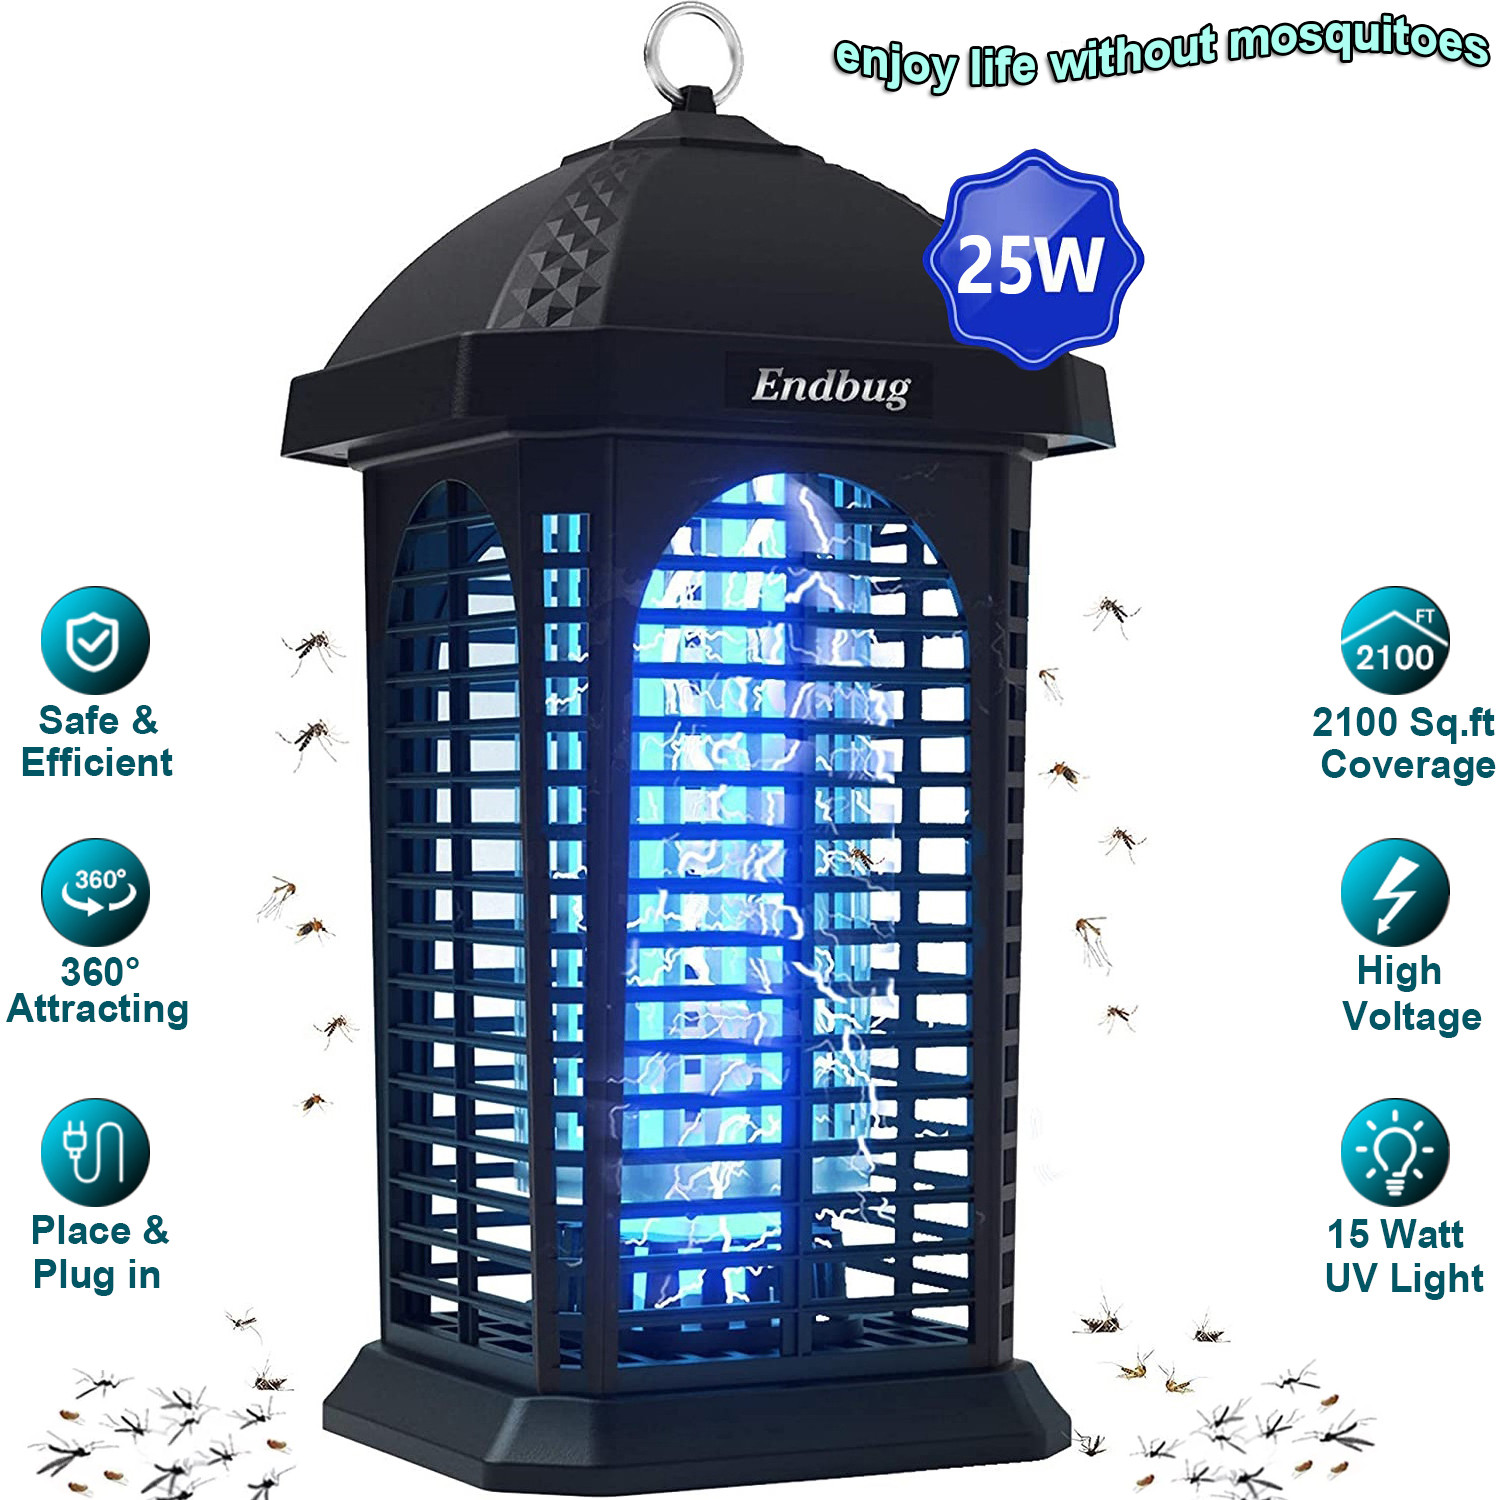 Bug Zapper Lights Mosquito Repeller 4200V 5W Mosquito Fly Bug Insect Killer UV Light Indoor Outdoor Electronic LED Light Trap Lamp for Garden Patio